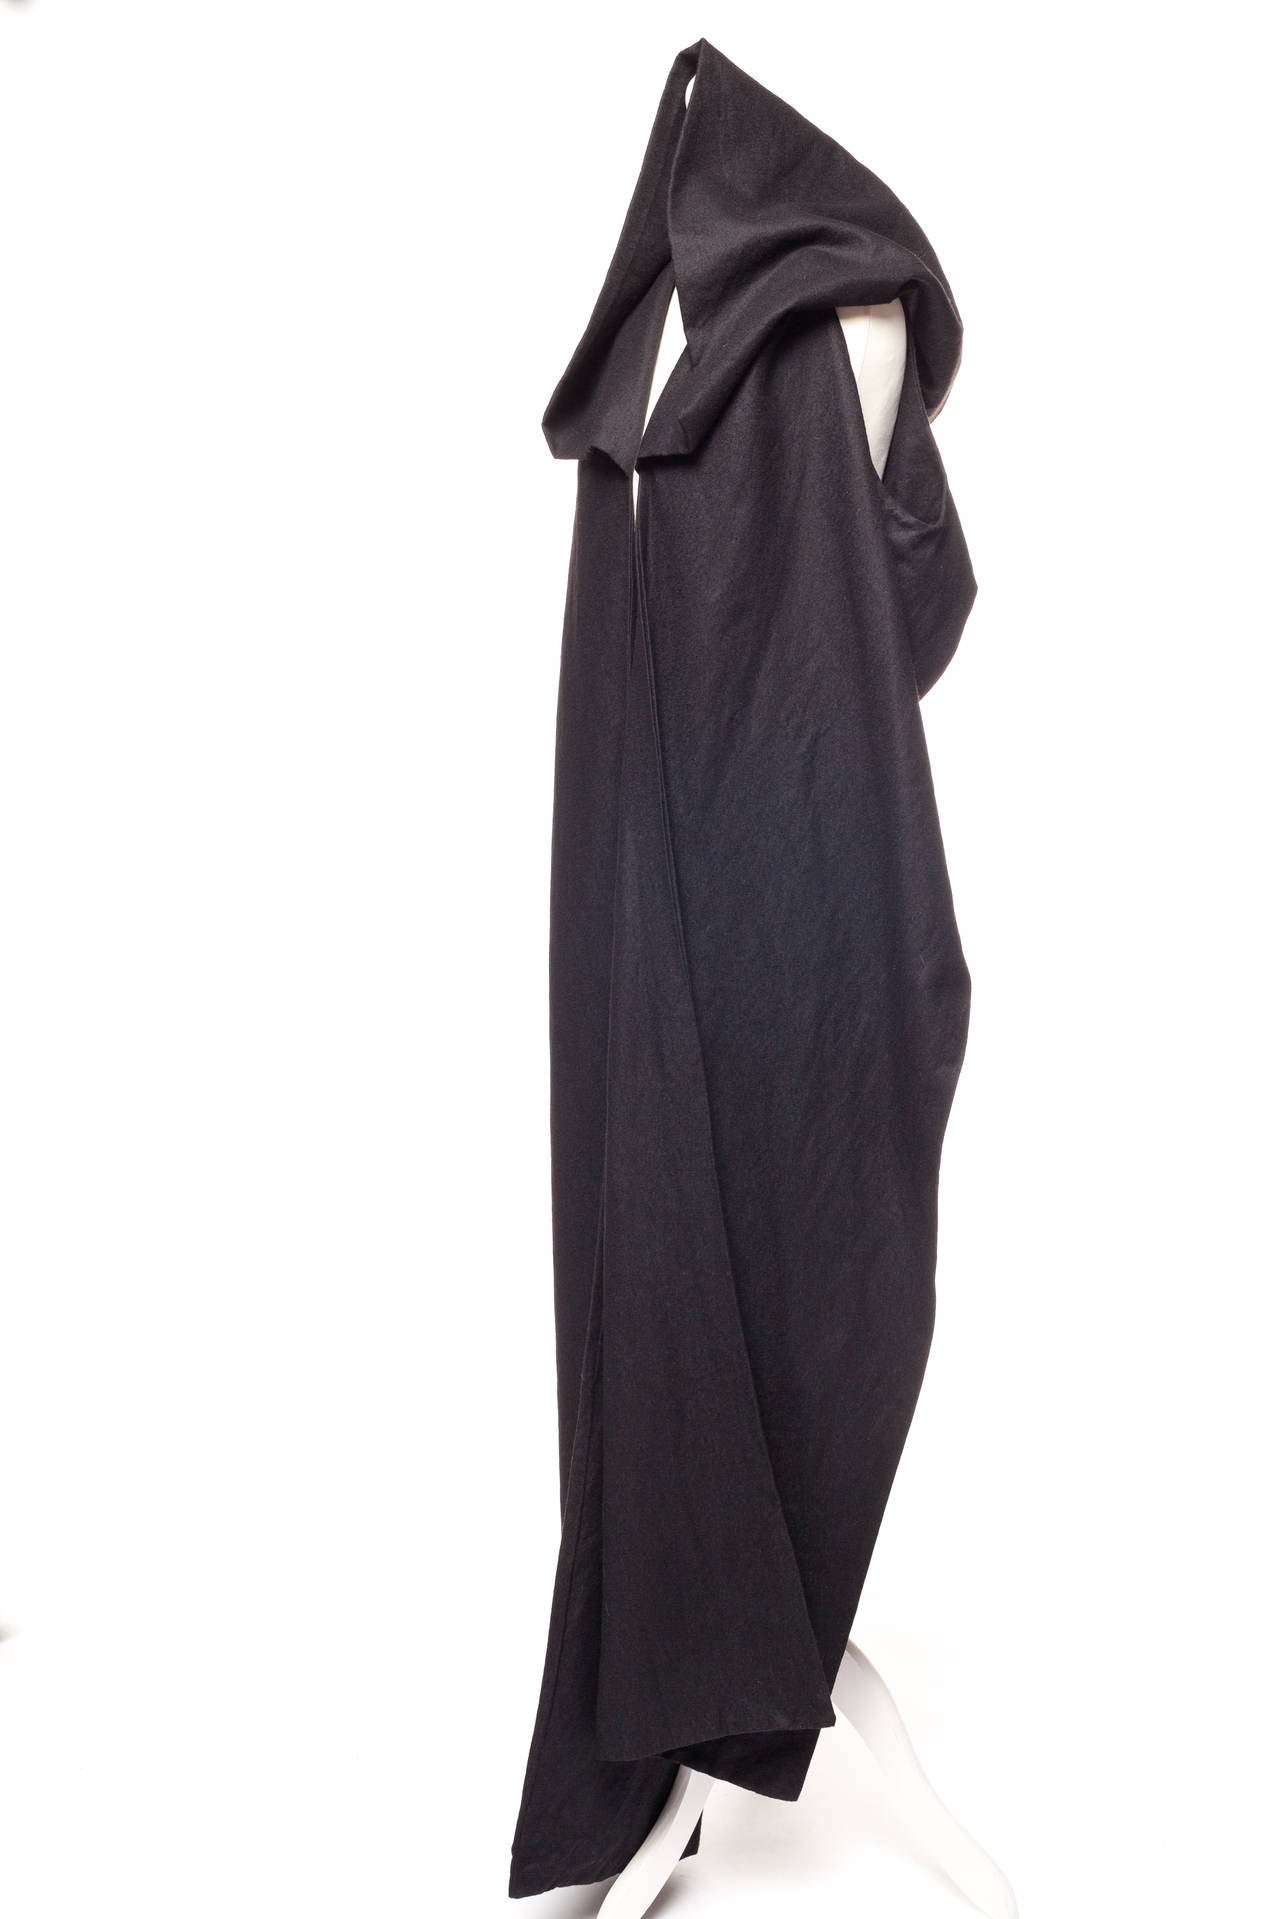 Ann Demeulemeester black cape with oversized hood from early 2000's, Sz.10 1